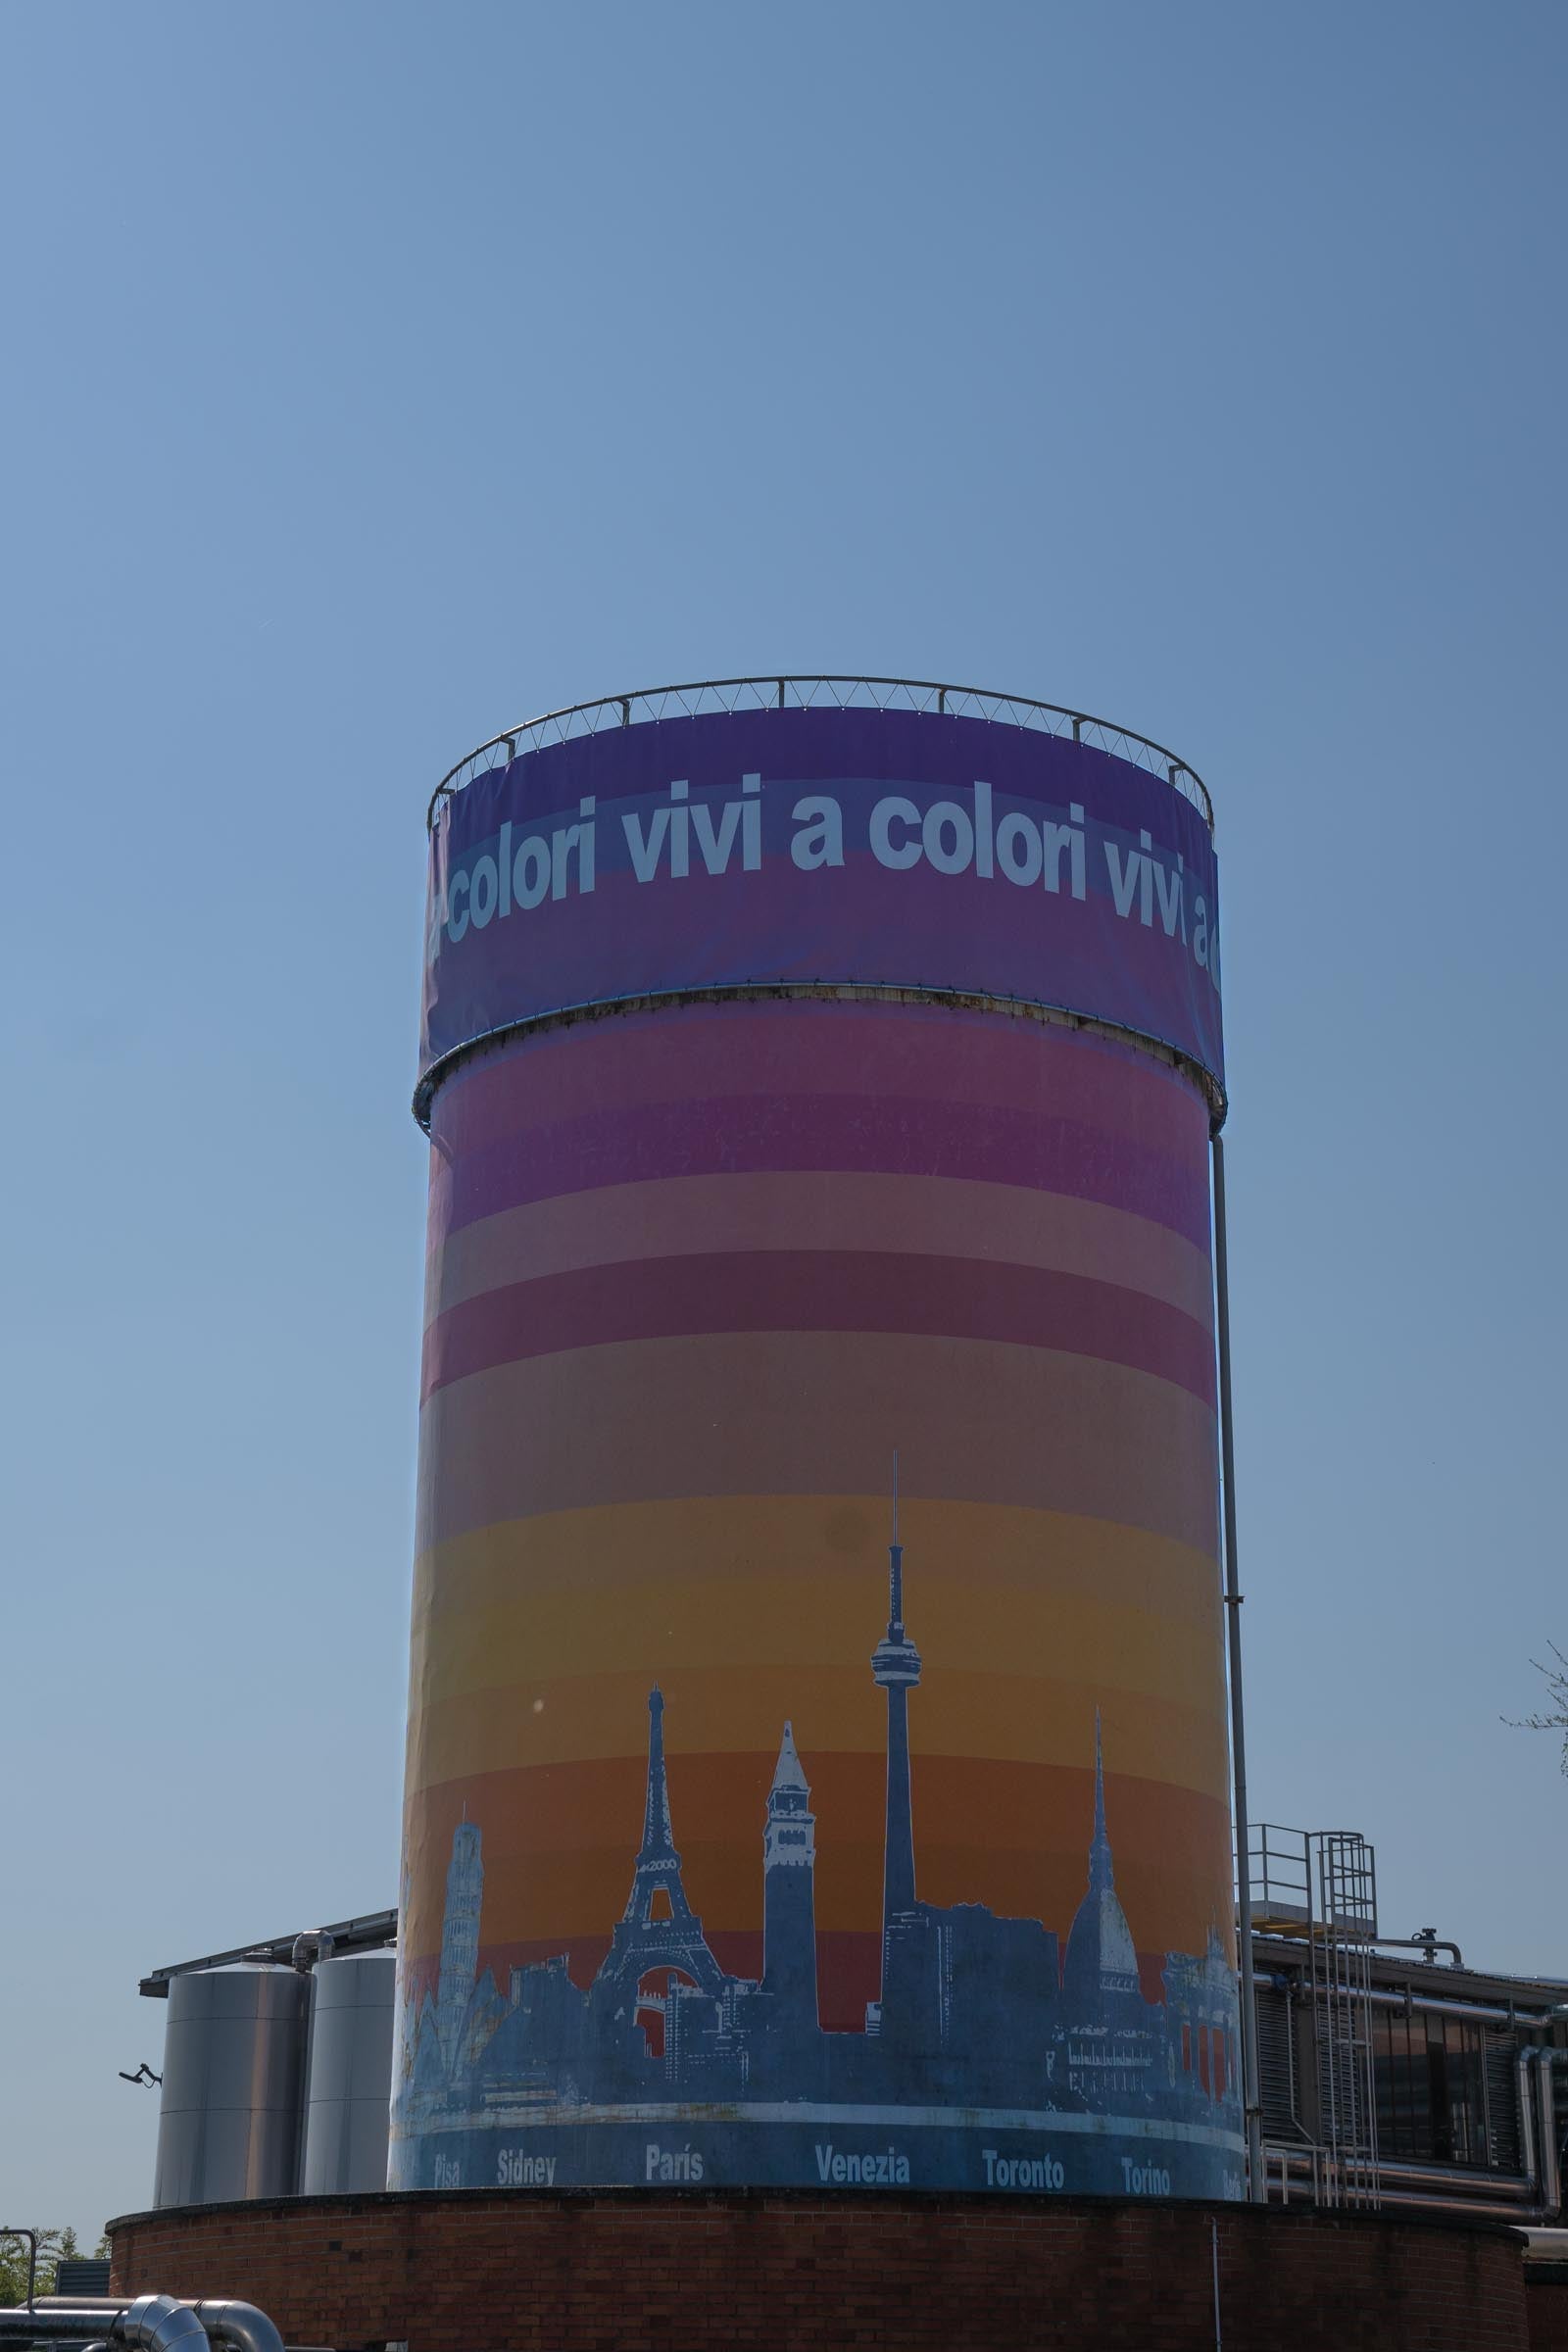 A water silo adorned with "Vico a colori" and vibrant purple and orange hues painted across the facility of Tintoria Ferraris.